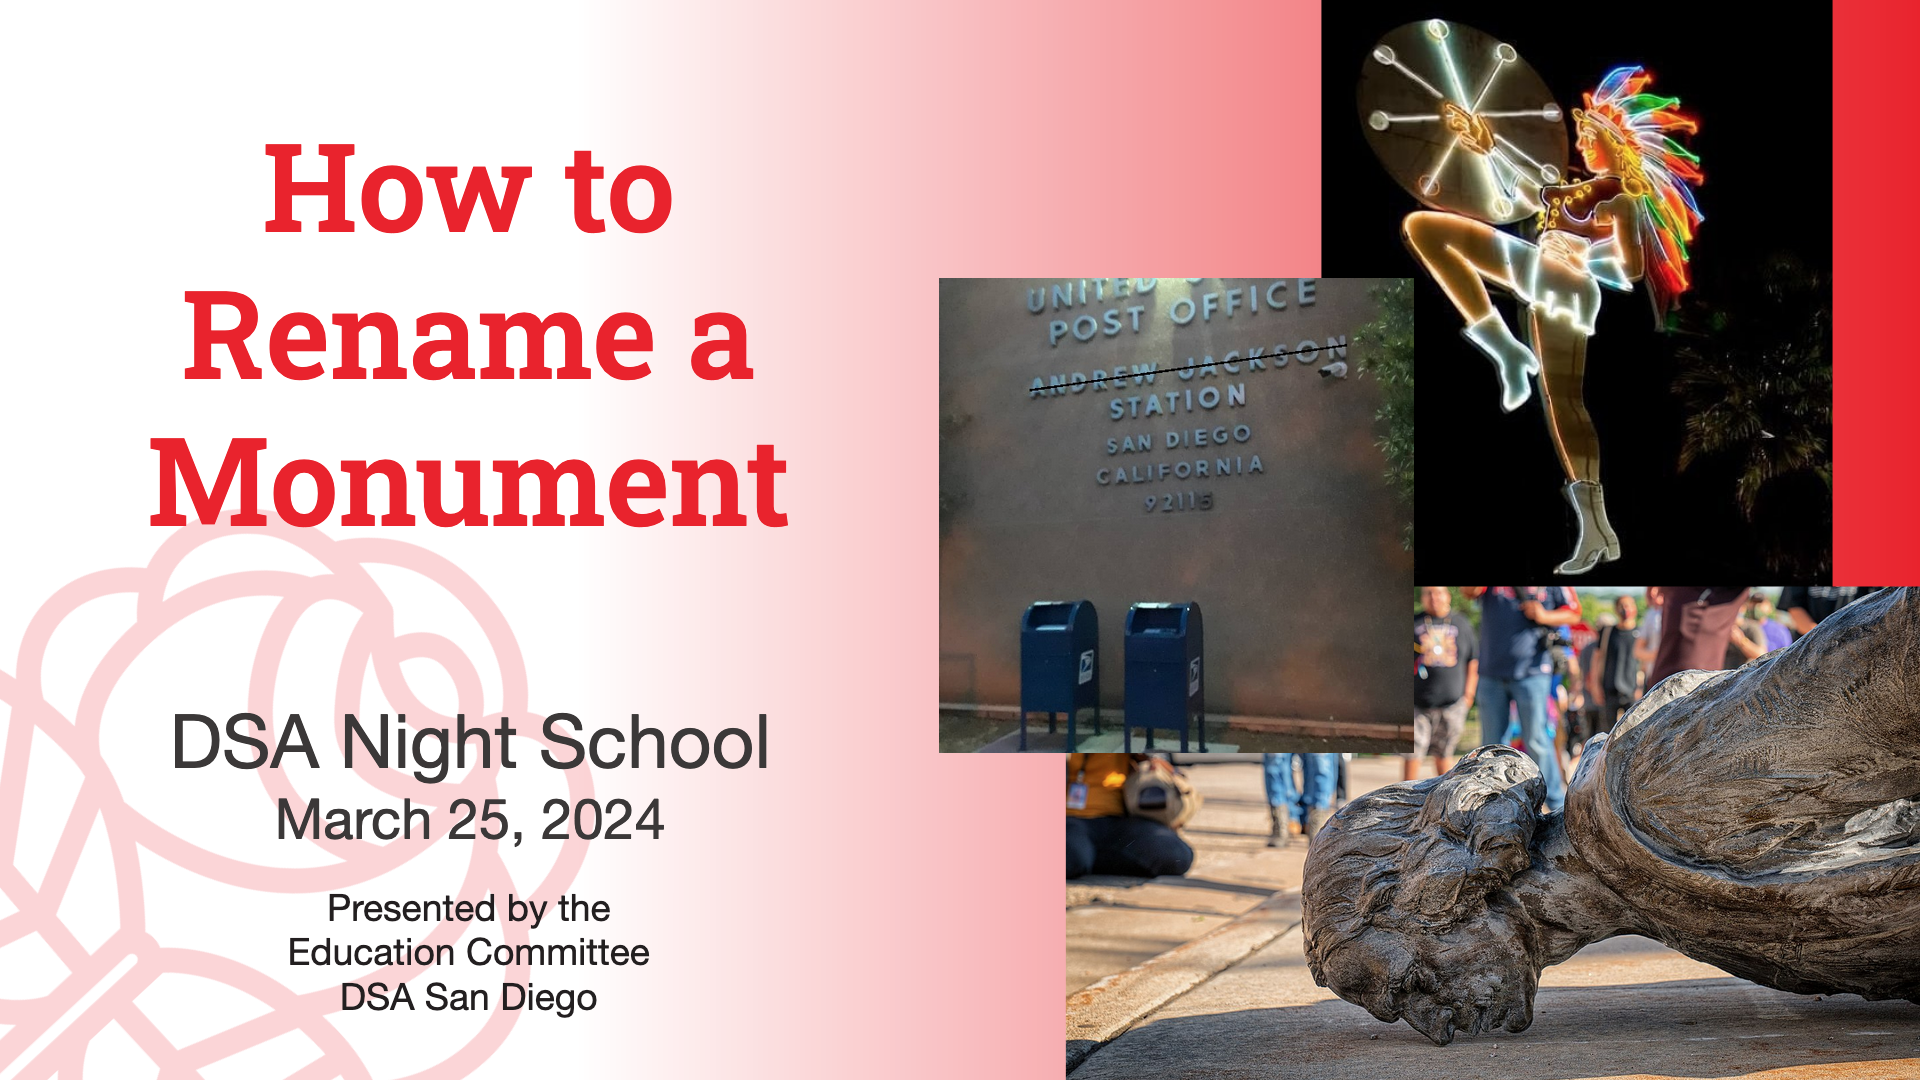 How to Rename a Monument